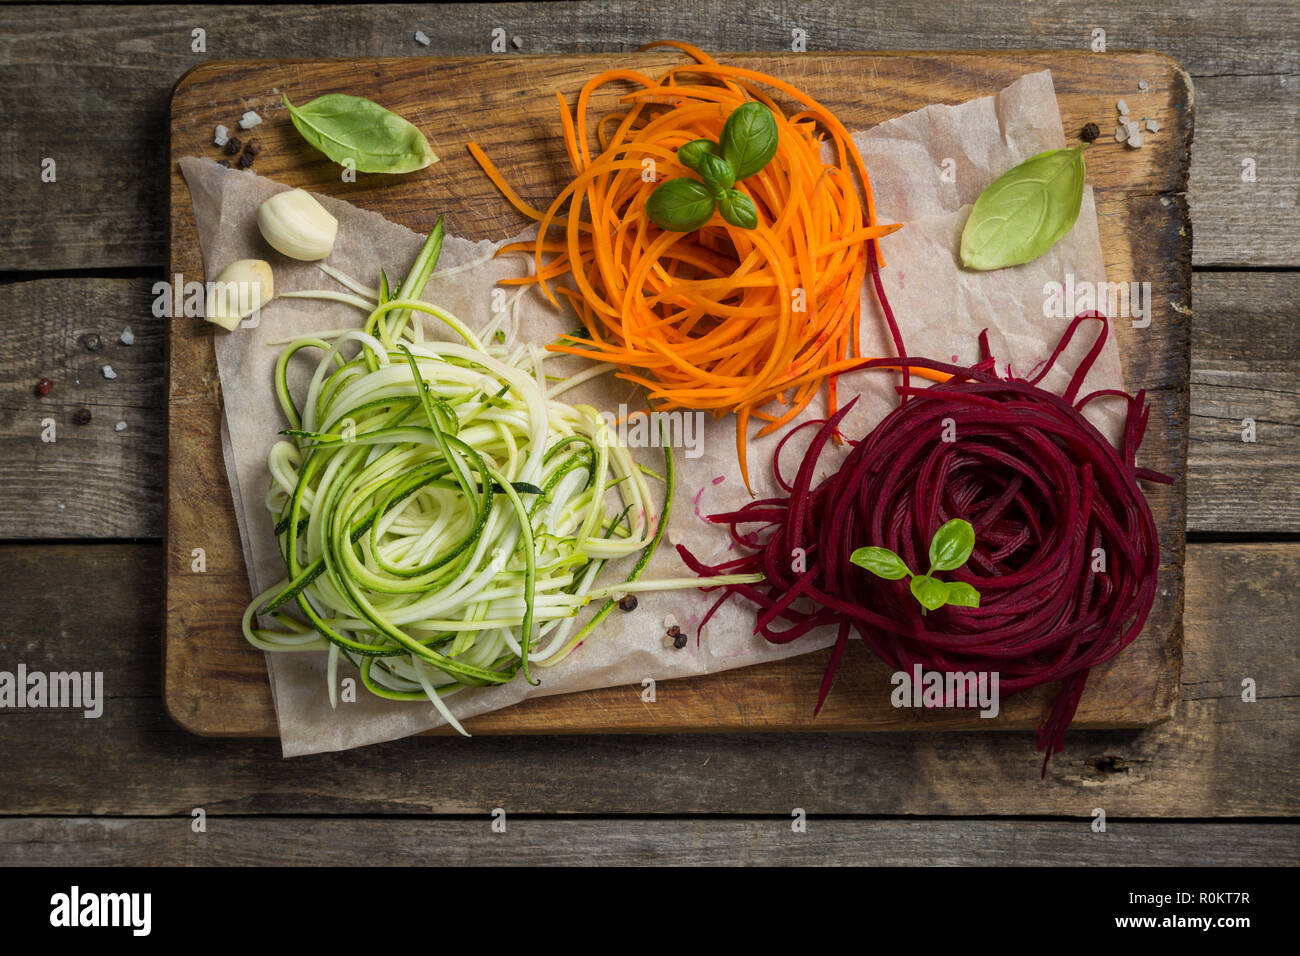 Vegetable noodles - zucchini, carrot and beetroot Stock Photo